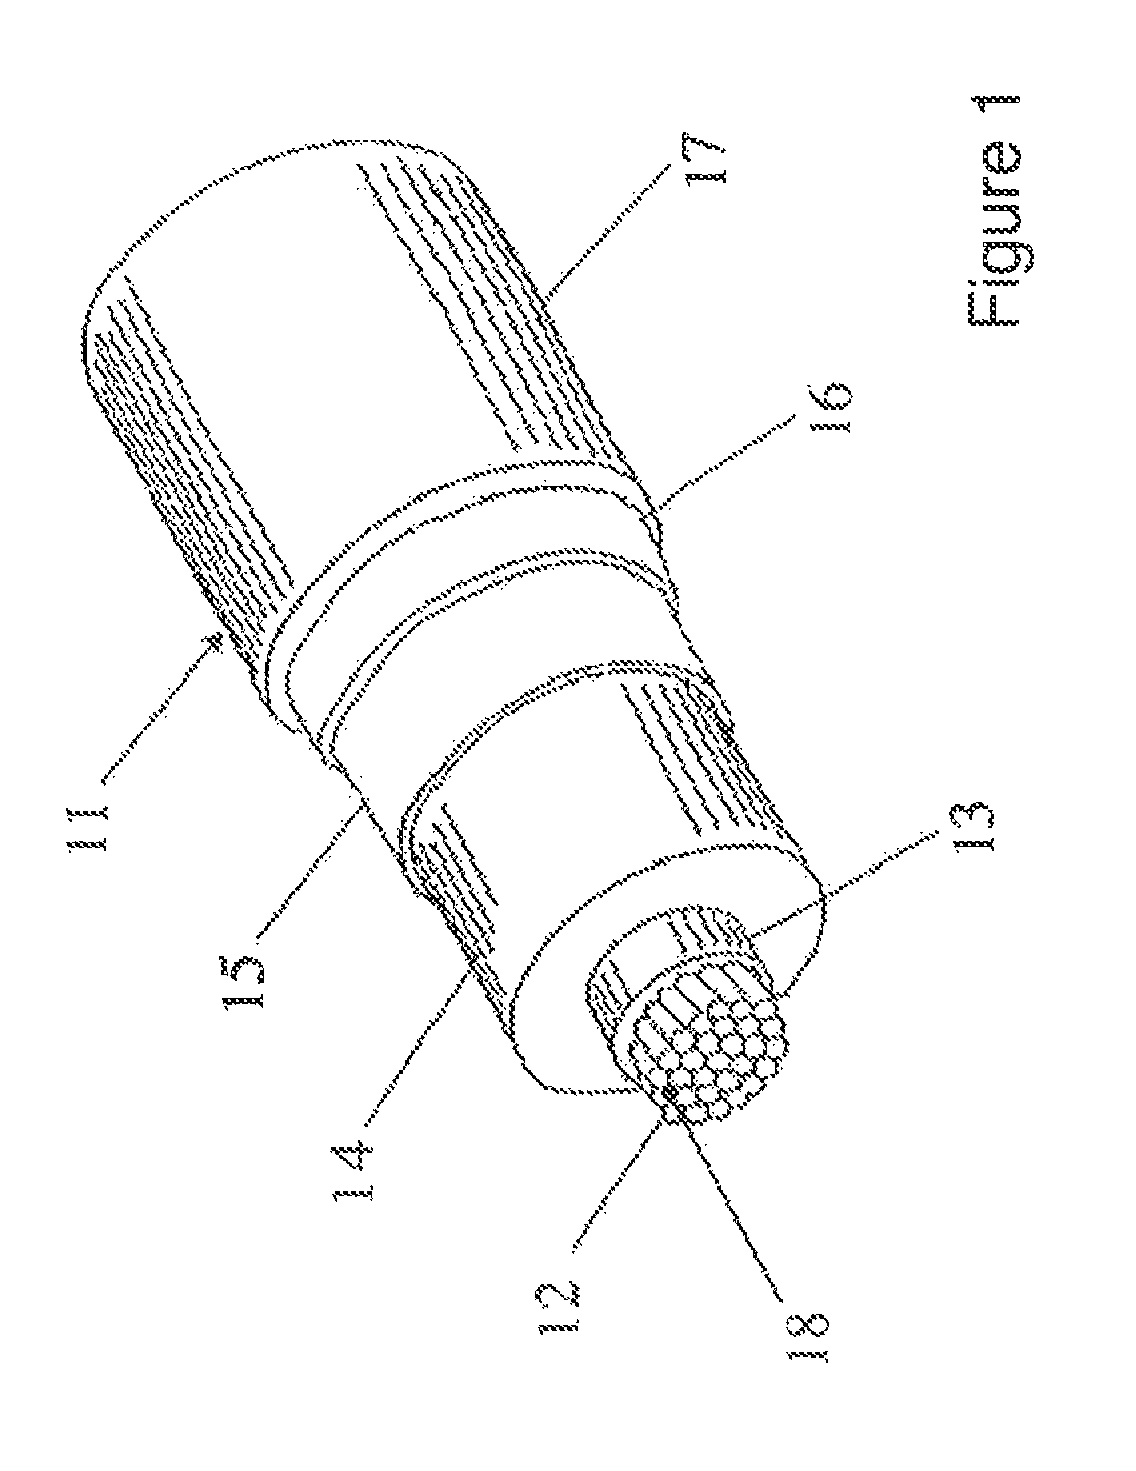 Cable comprising an element indicating water infiltration and method using said element